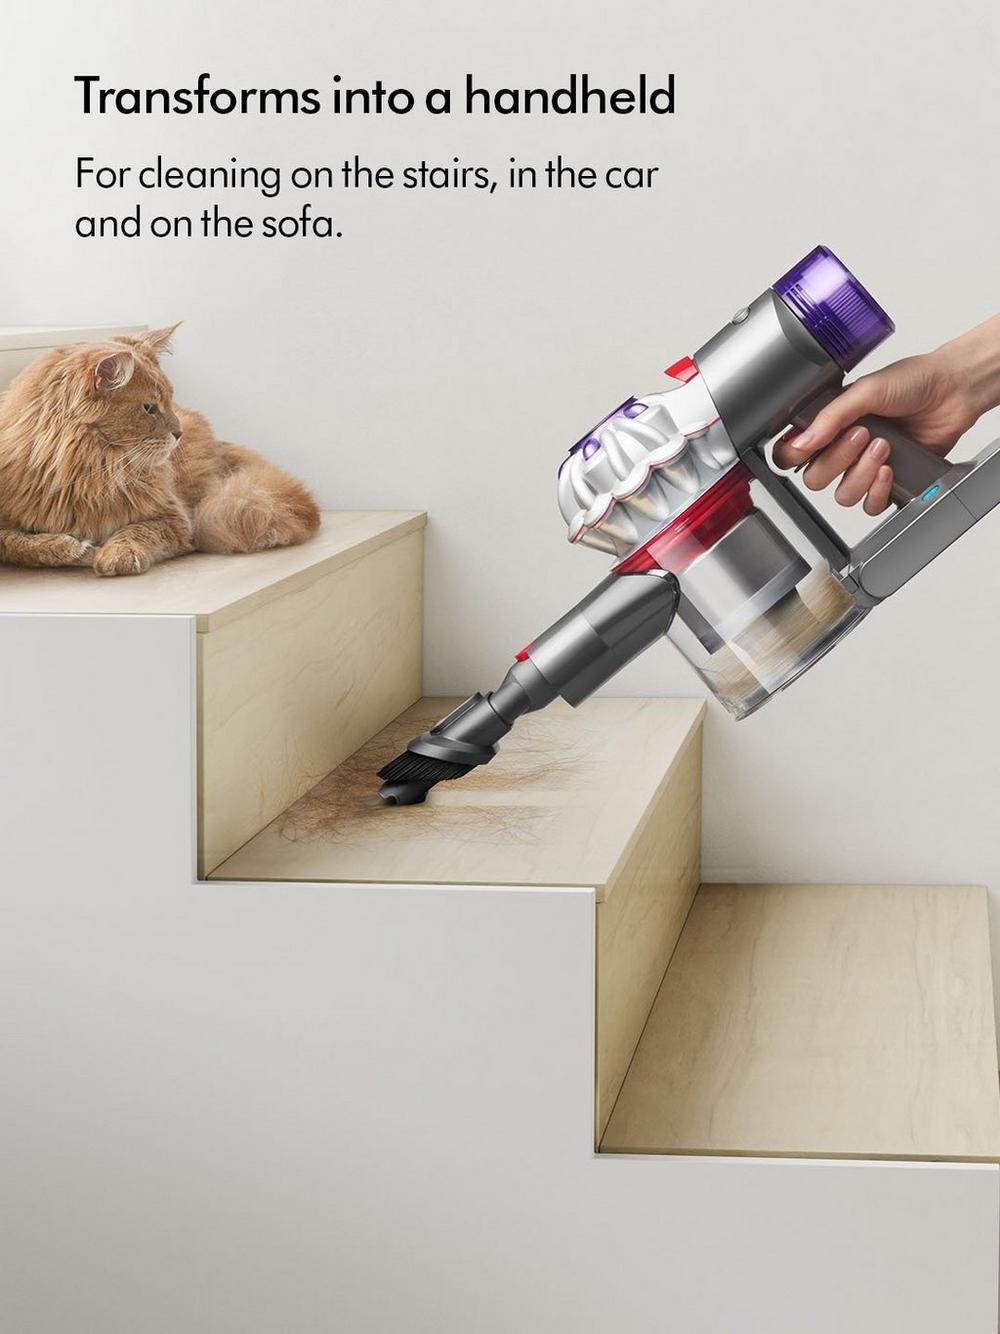 Transforms into a handheld for cleaning the stairs, or the sofa, or the interior of a car.